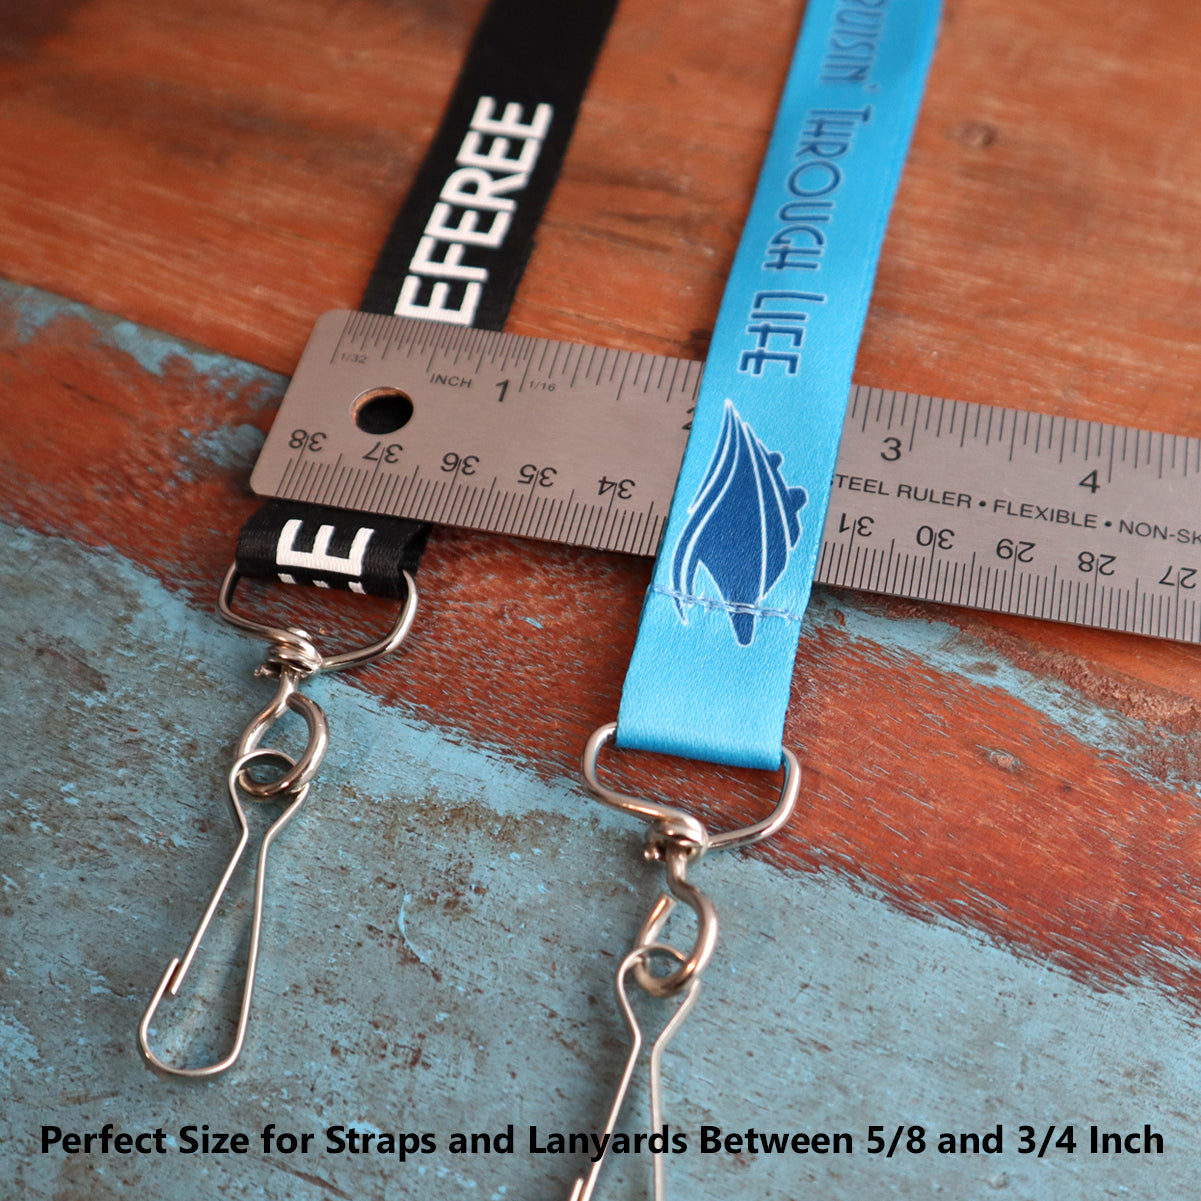 Two lanyards, one black and one blue, are measured against a ruler. The black lanyard reads "REFEREE," while the blue lanyard features a design and text. Both come with sturdy Premium Swivel J Clip Clasp with Wide, Smooth Rounded 3/4 Inch D Ring - DIY Lanyard and Craft Accessories (6905-M-289). The bottom text states strap sizes between 5/8 and 3/4 inch.